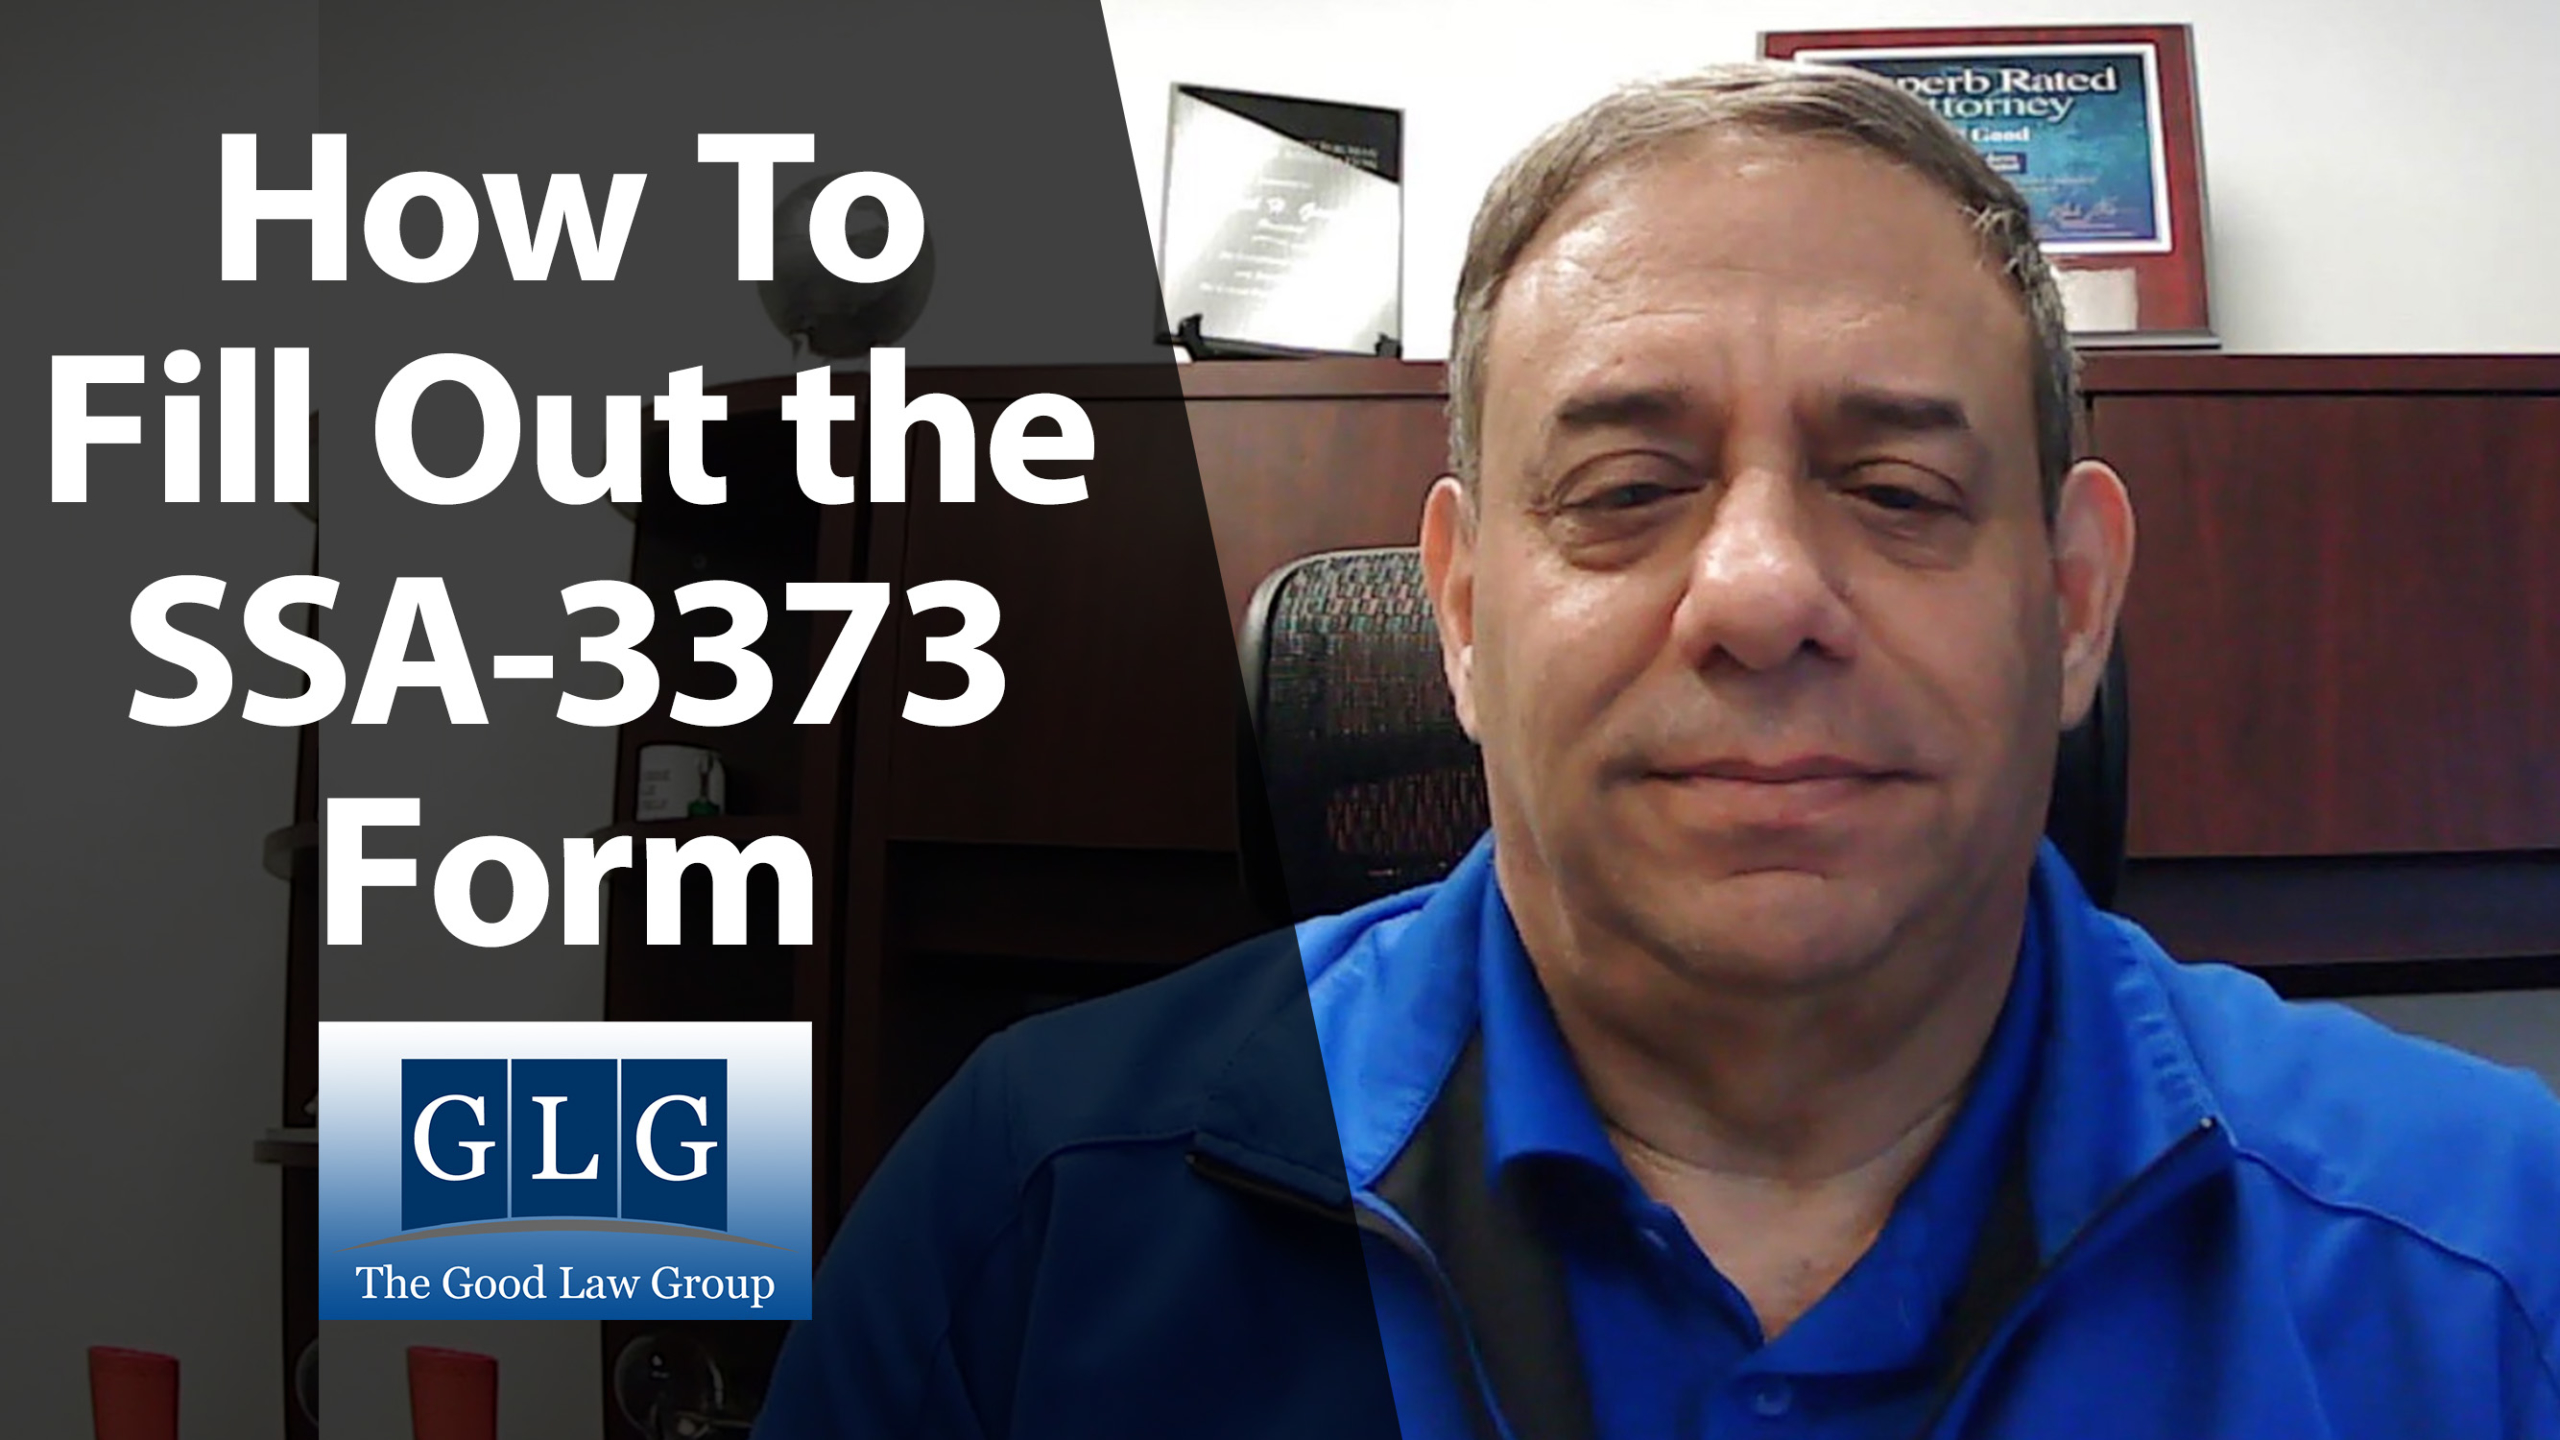 How to Correctly Fill Out the SSA-3373 Form | The Good Law Group